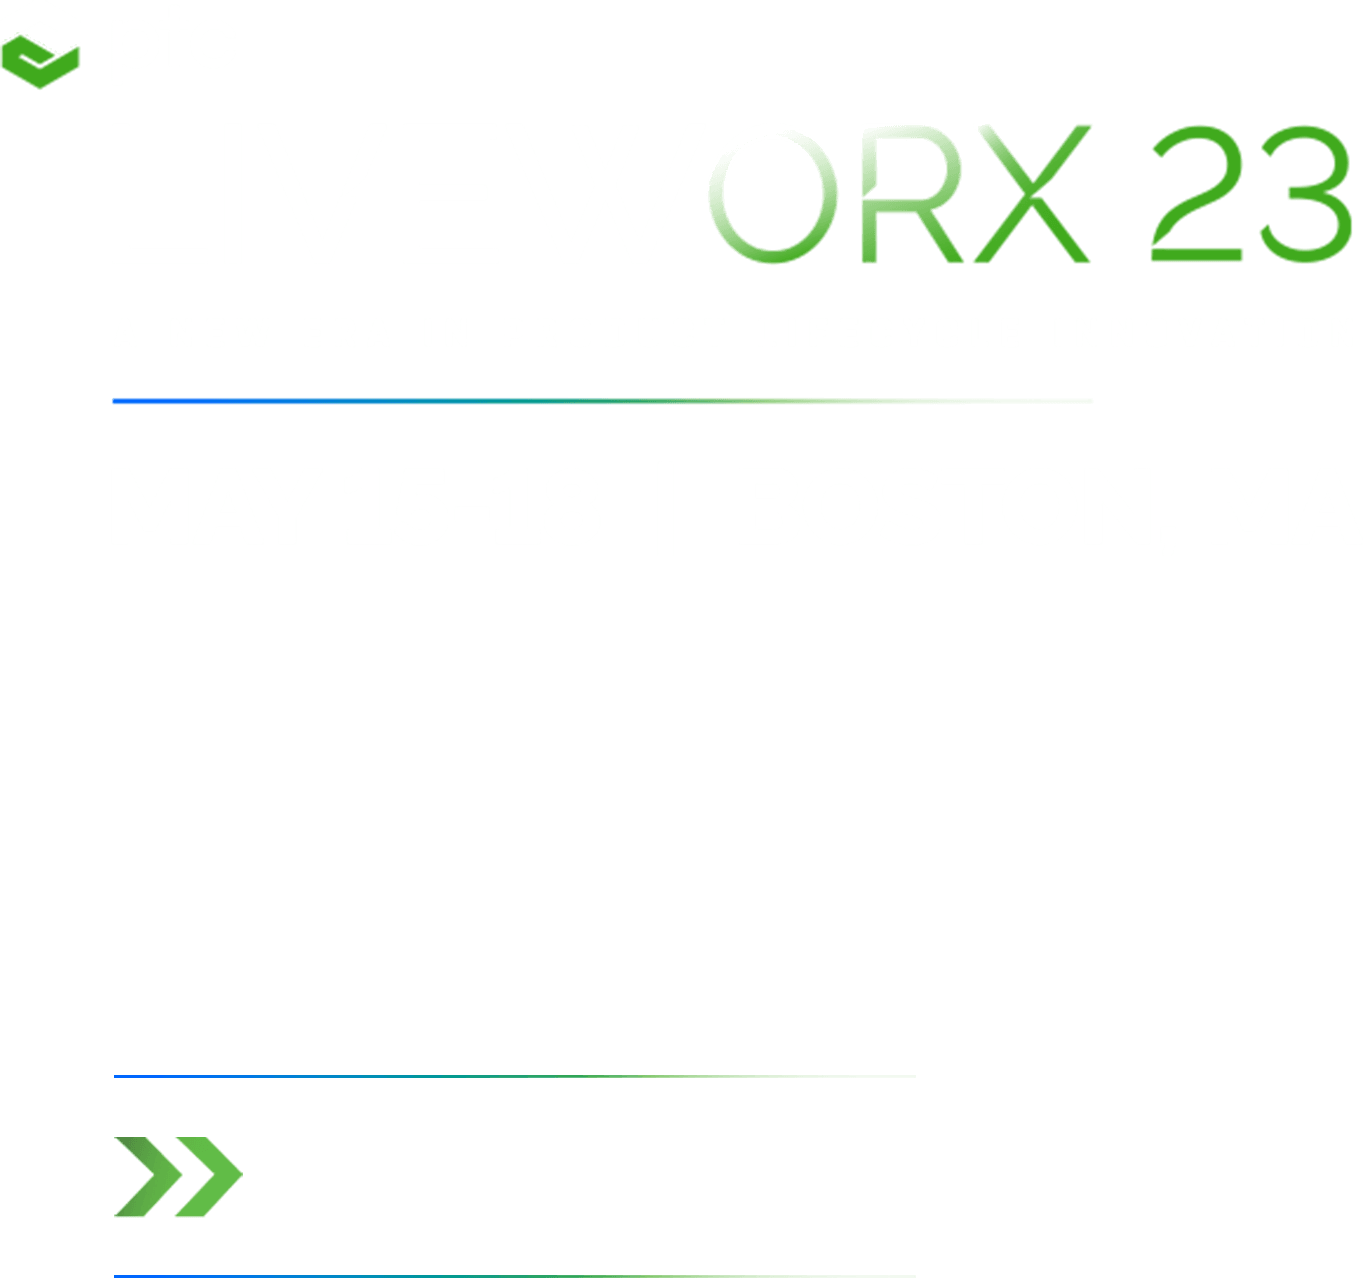 Liveworx User Conference Logo - Get Exlusive Onshape Content - May 15th - 18th in Boston MA